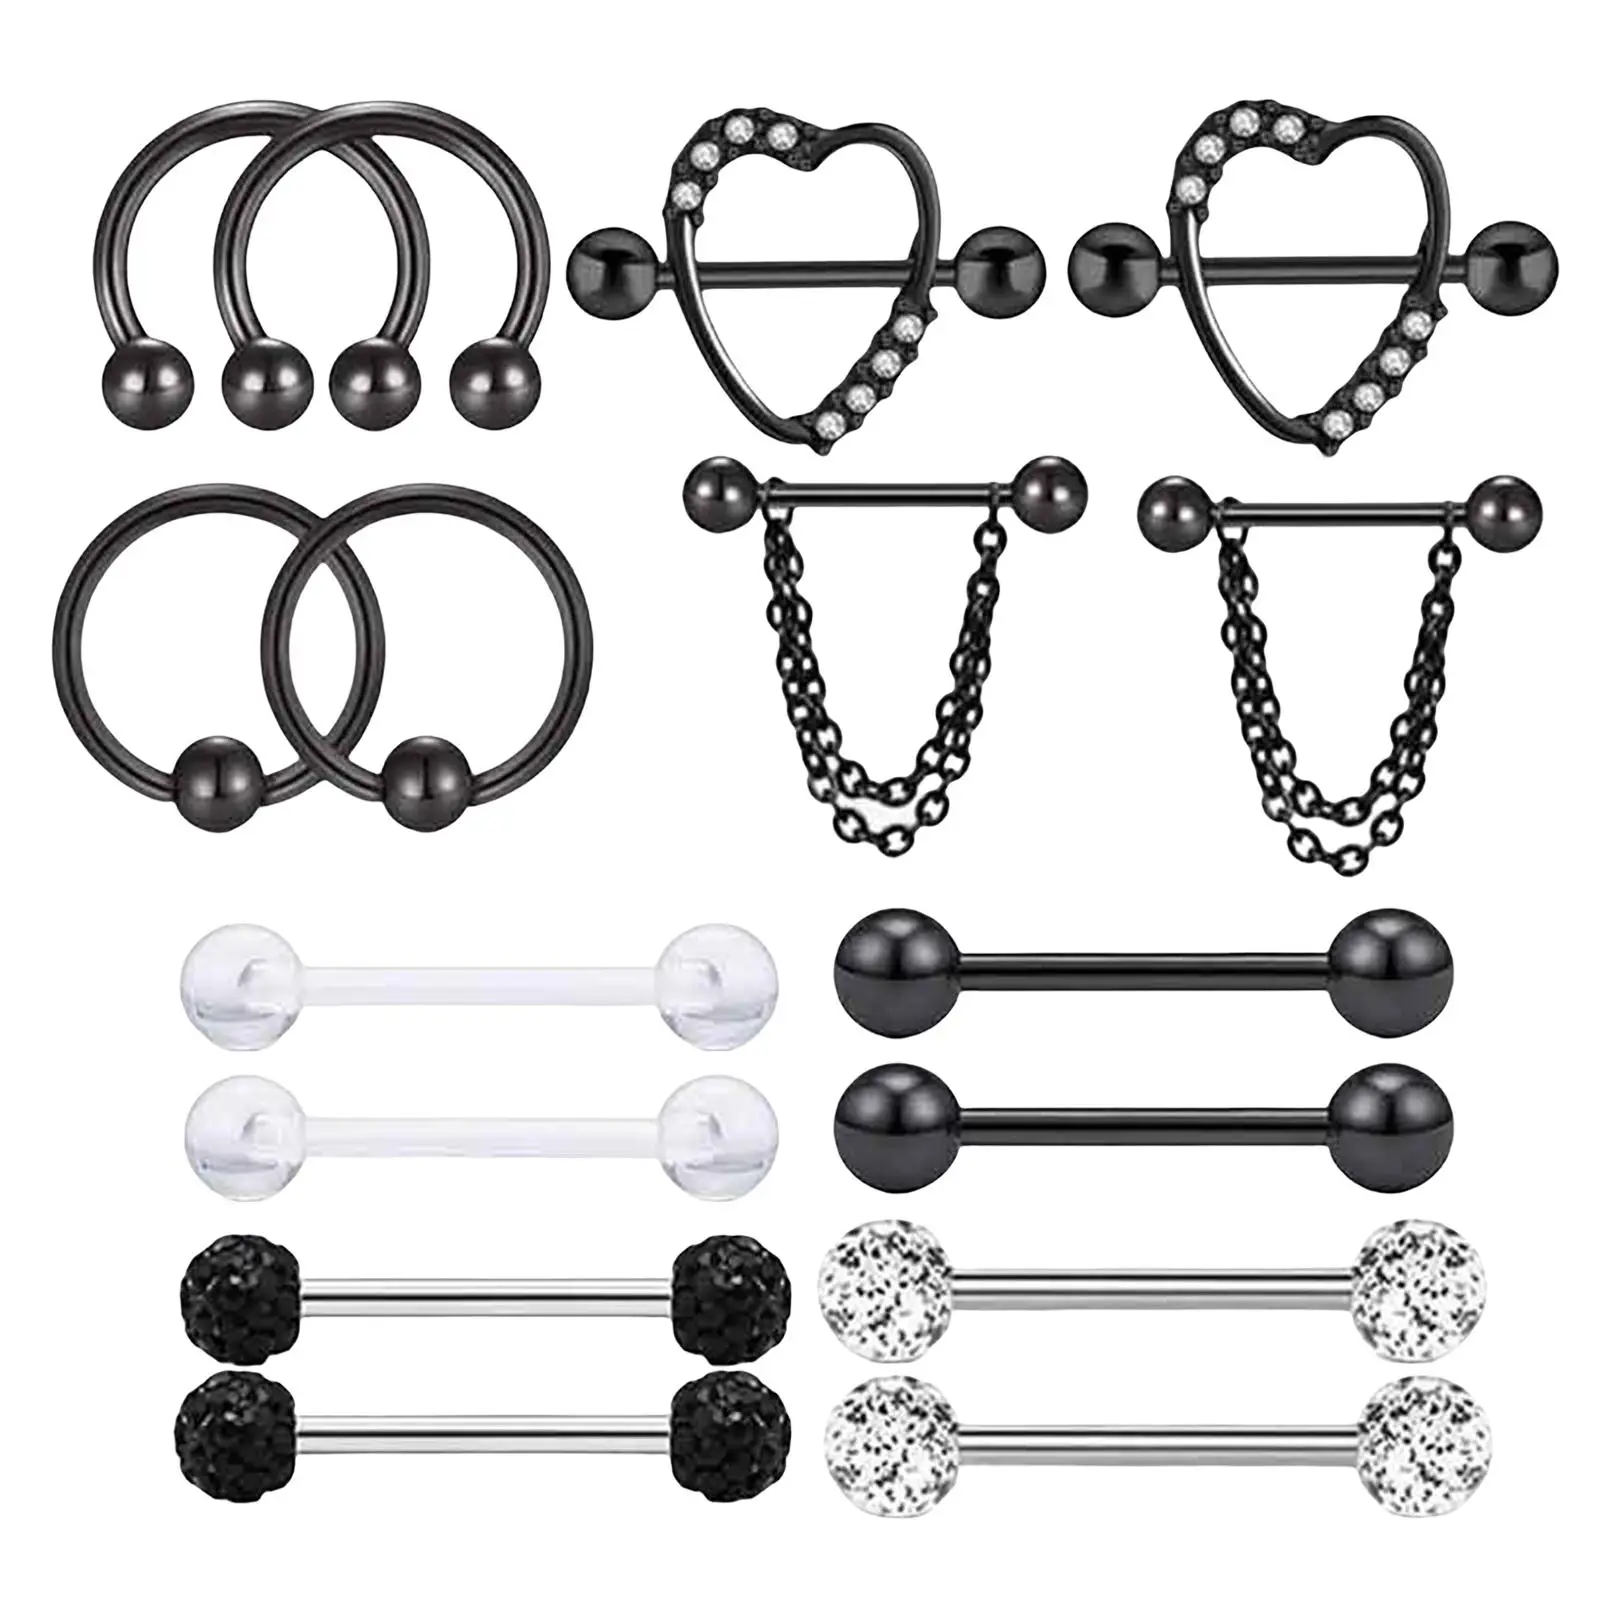 8 Pairs Charming Pierced Body Jewelry Straight Barbell Stainless Steel Studs Rings for Women Teen Girls Premium